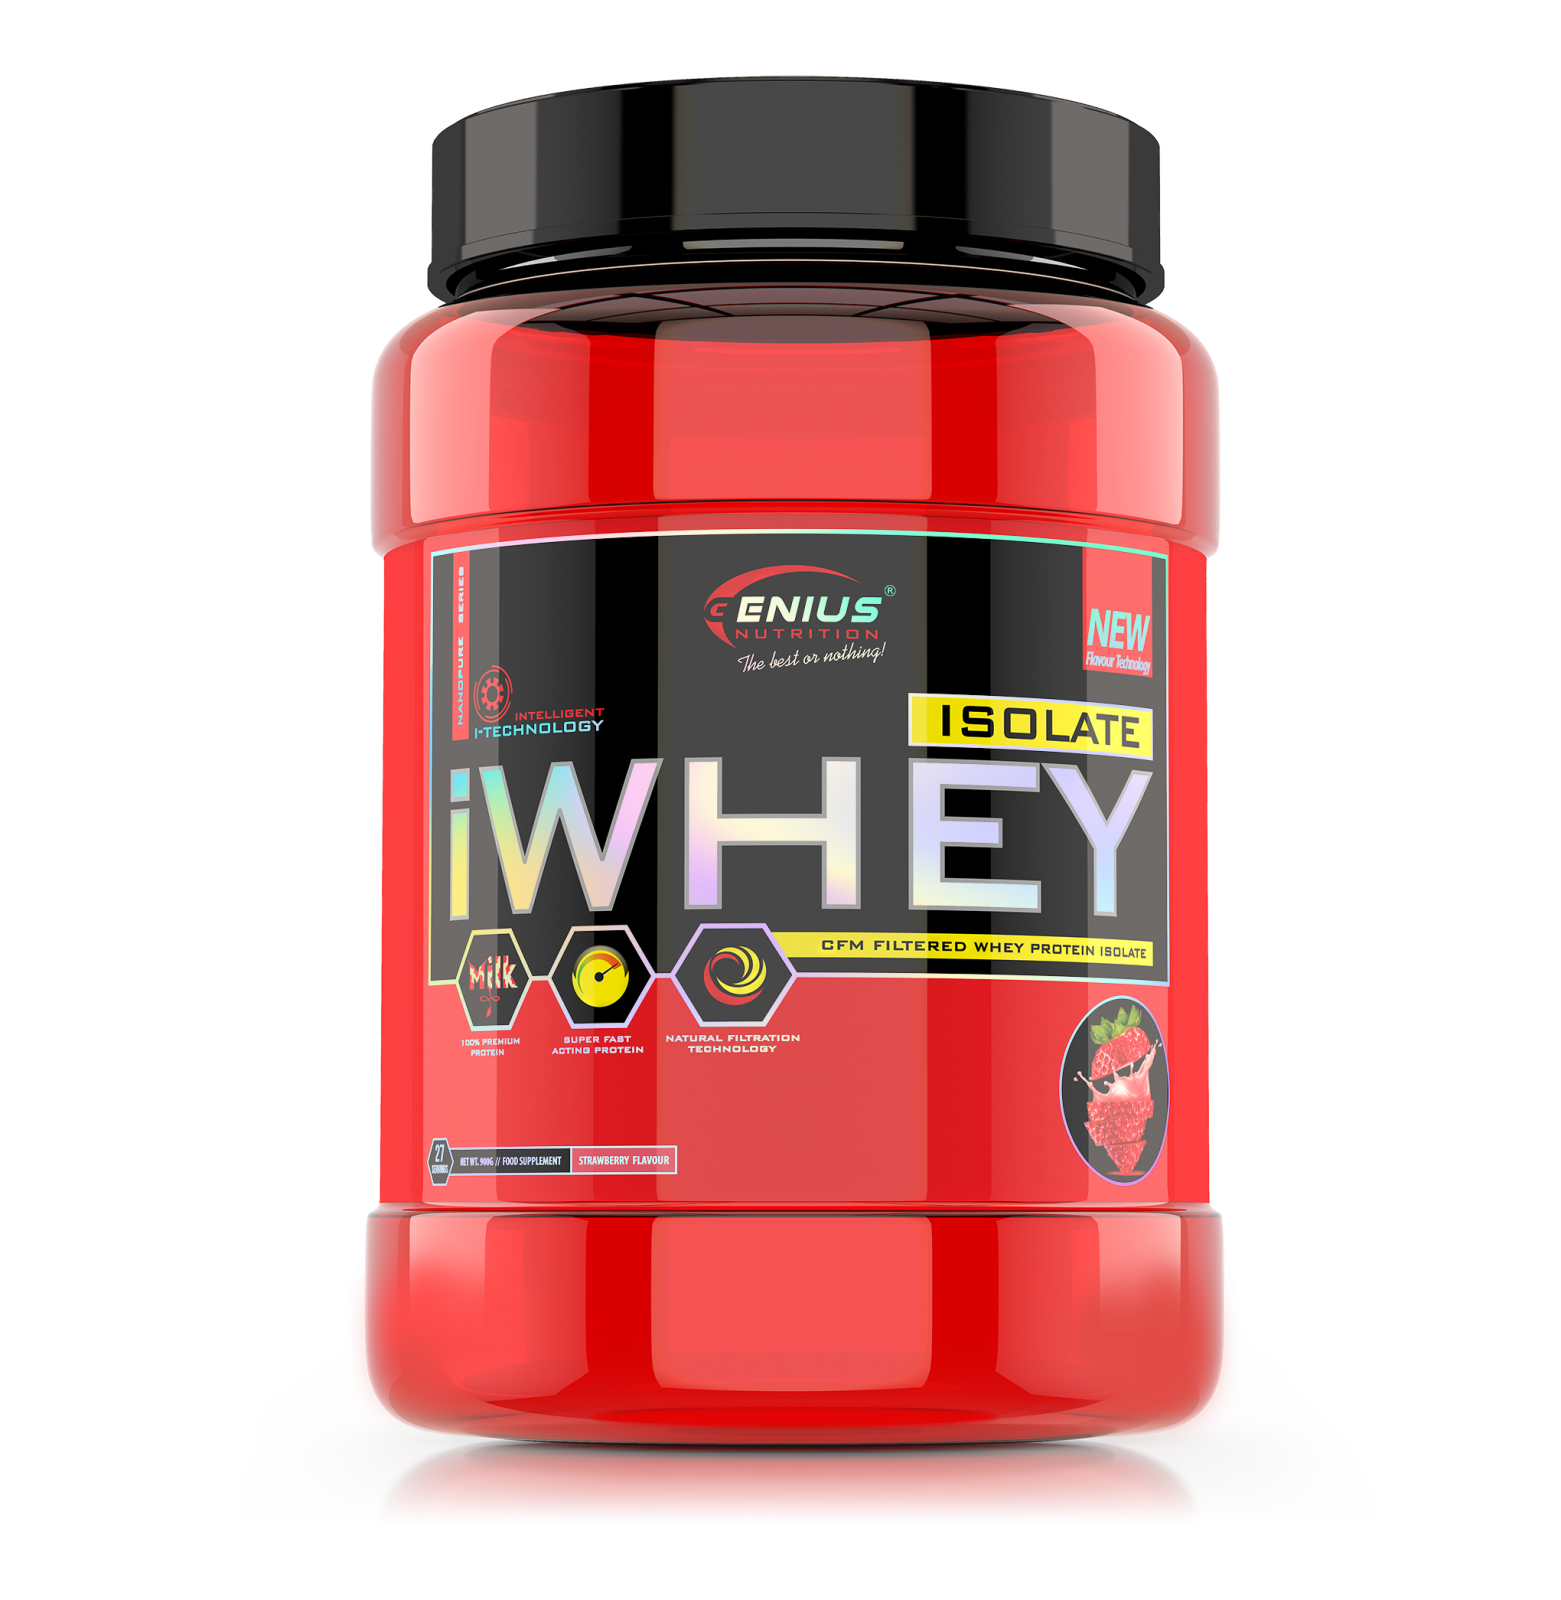 Genius - iWhey Isolate 2.0 - 900 gr. Protein Outelt